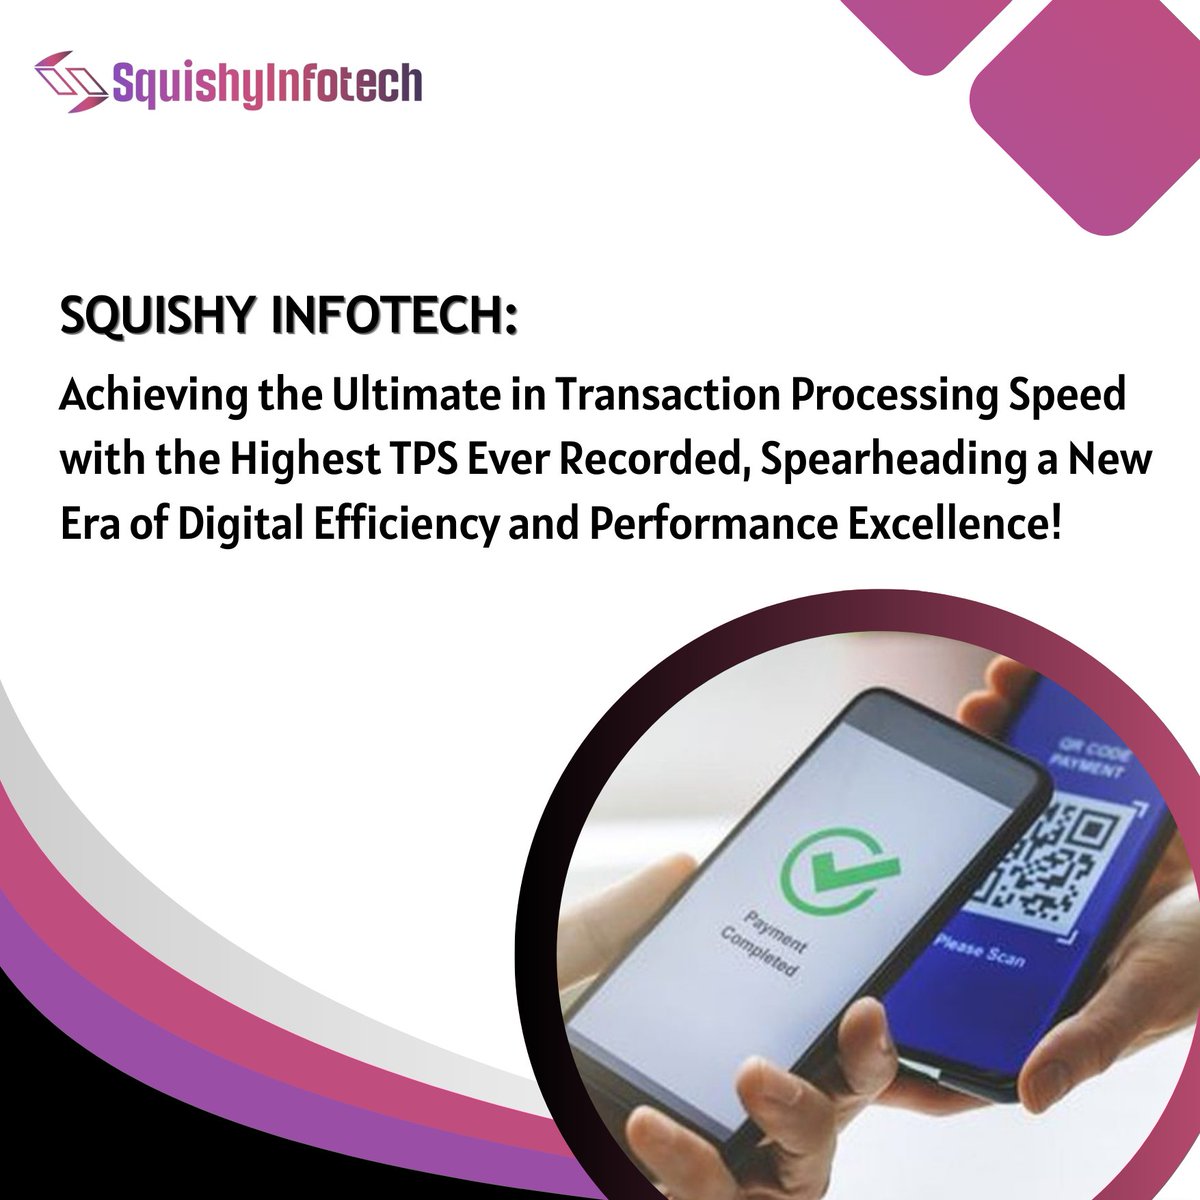 Unleashing unprecedented transaction speed! 💥 Squishy Infotech breaks records with the highest TPS ever, blazing a trail towards unmatched digital efficiency.
#squishyinfotech
#paymentgateway
#recordbreaker
#digitalrevolution
#techinnovation
#efficiencyboost
#transactioninsights